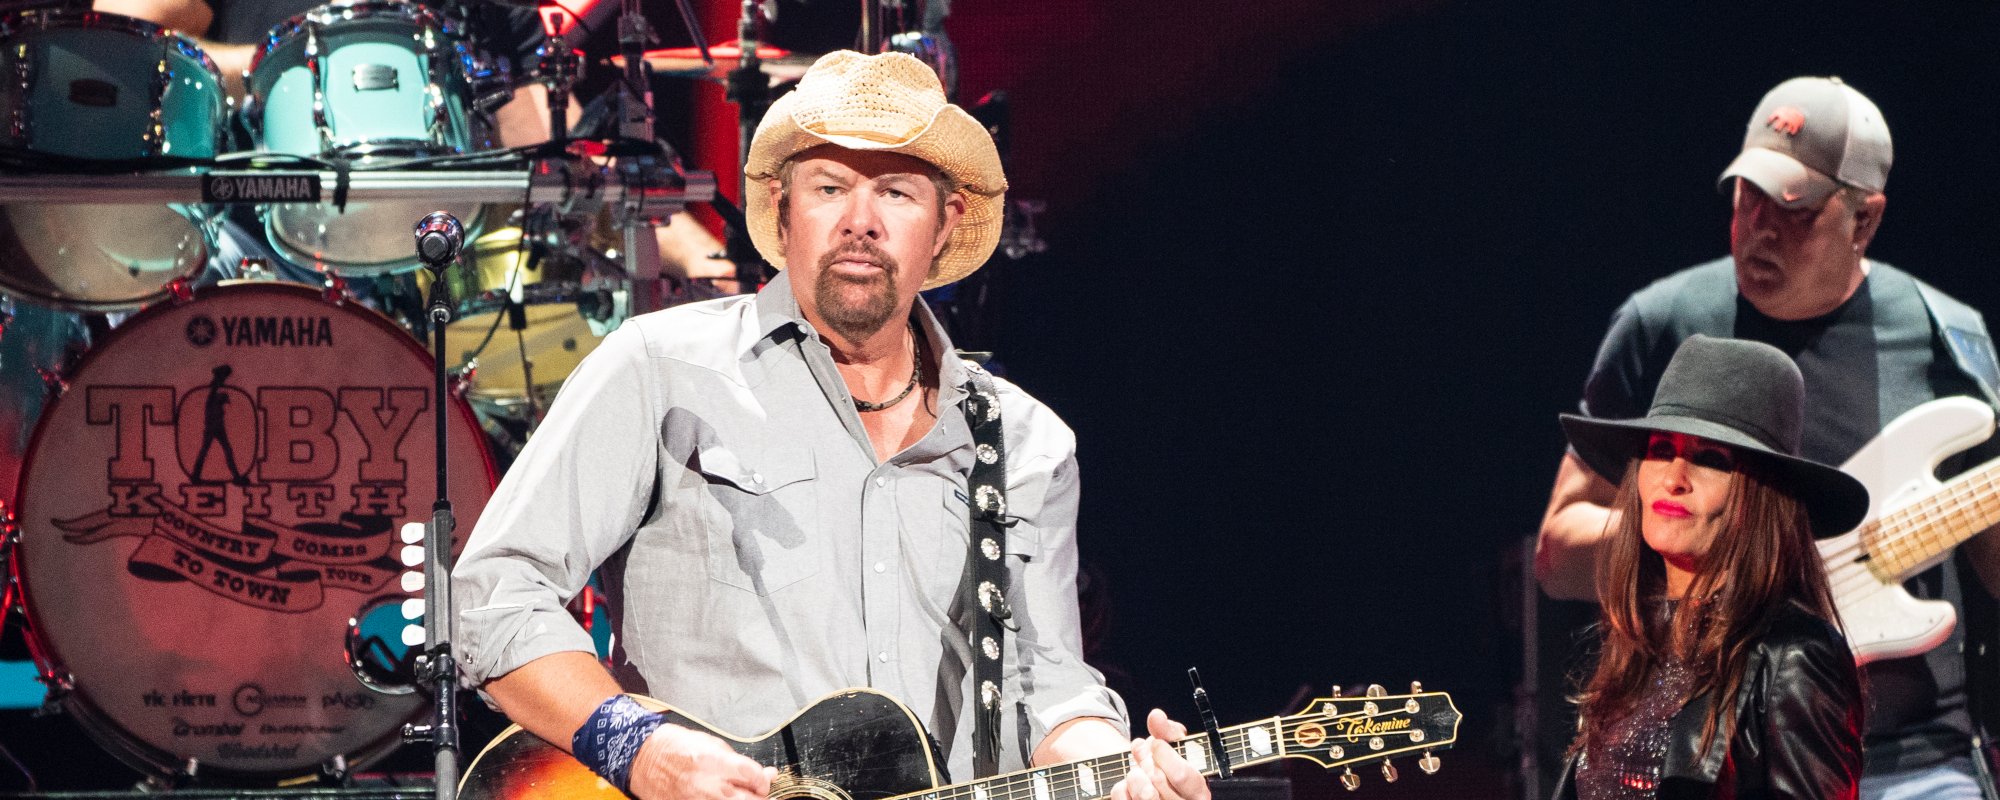 “Toby is Back”—Toby Keith Performs in Oklahoma Amidst Cancer Battle